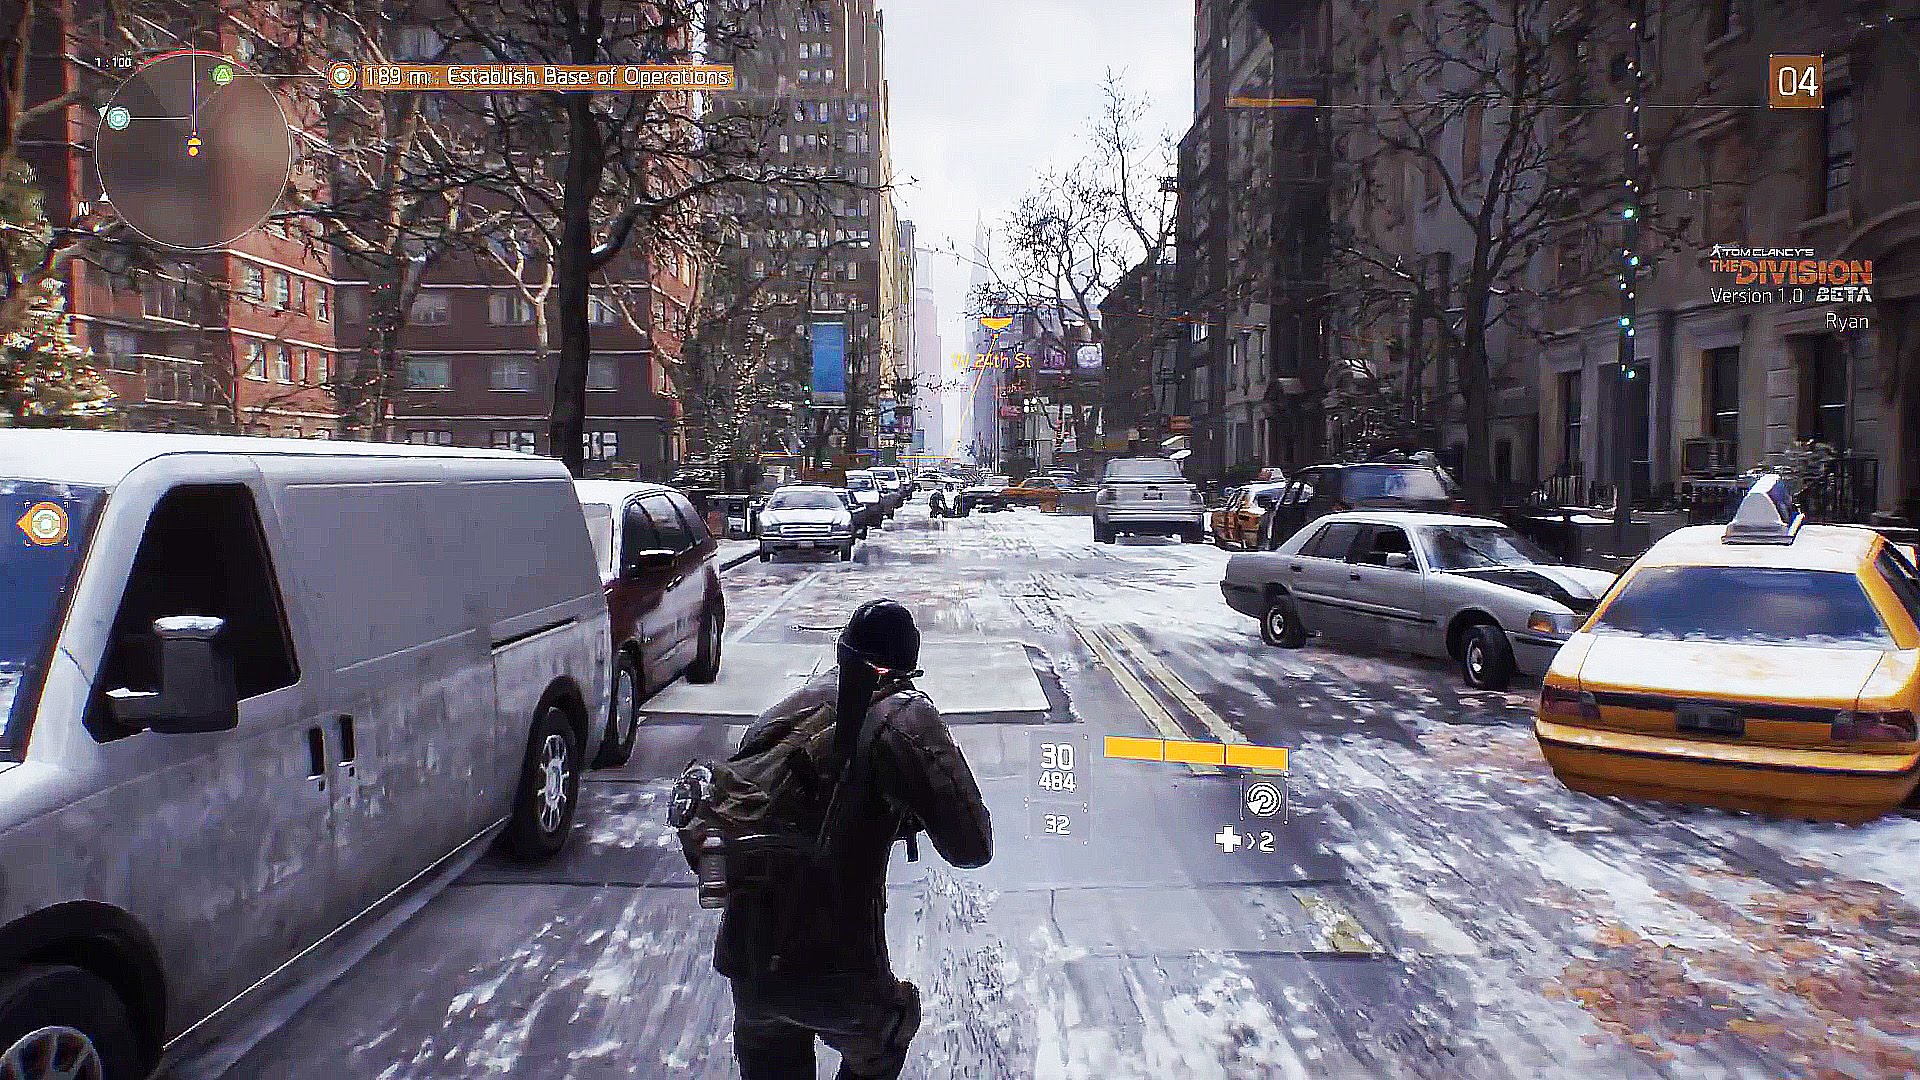 Gameplay's. Tom Clancy's the Division геймплей. The Division геймплей. Tom Clancy s the Division Gameplay. The Division 1 Gameplay.